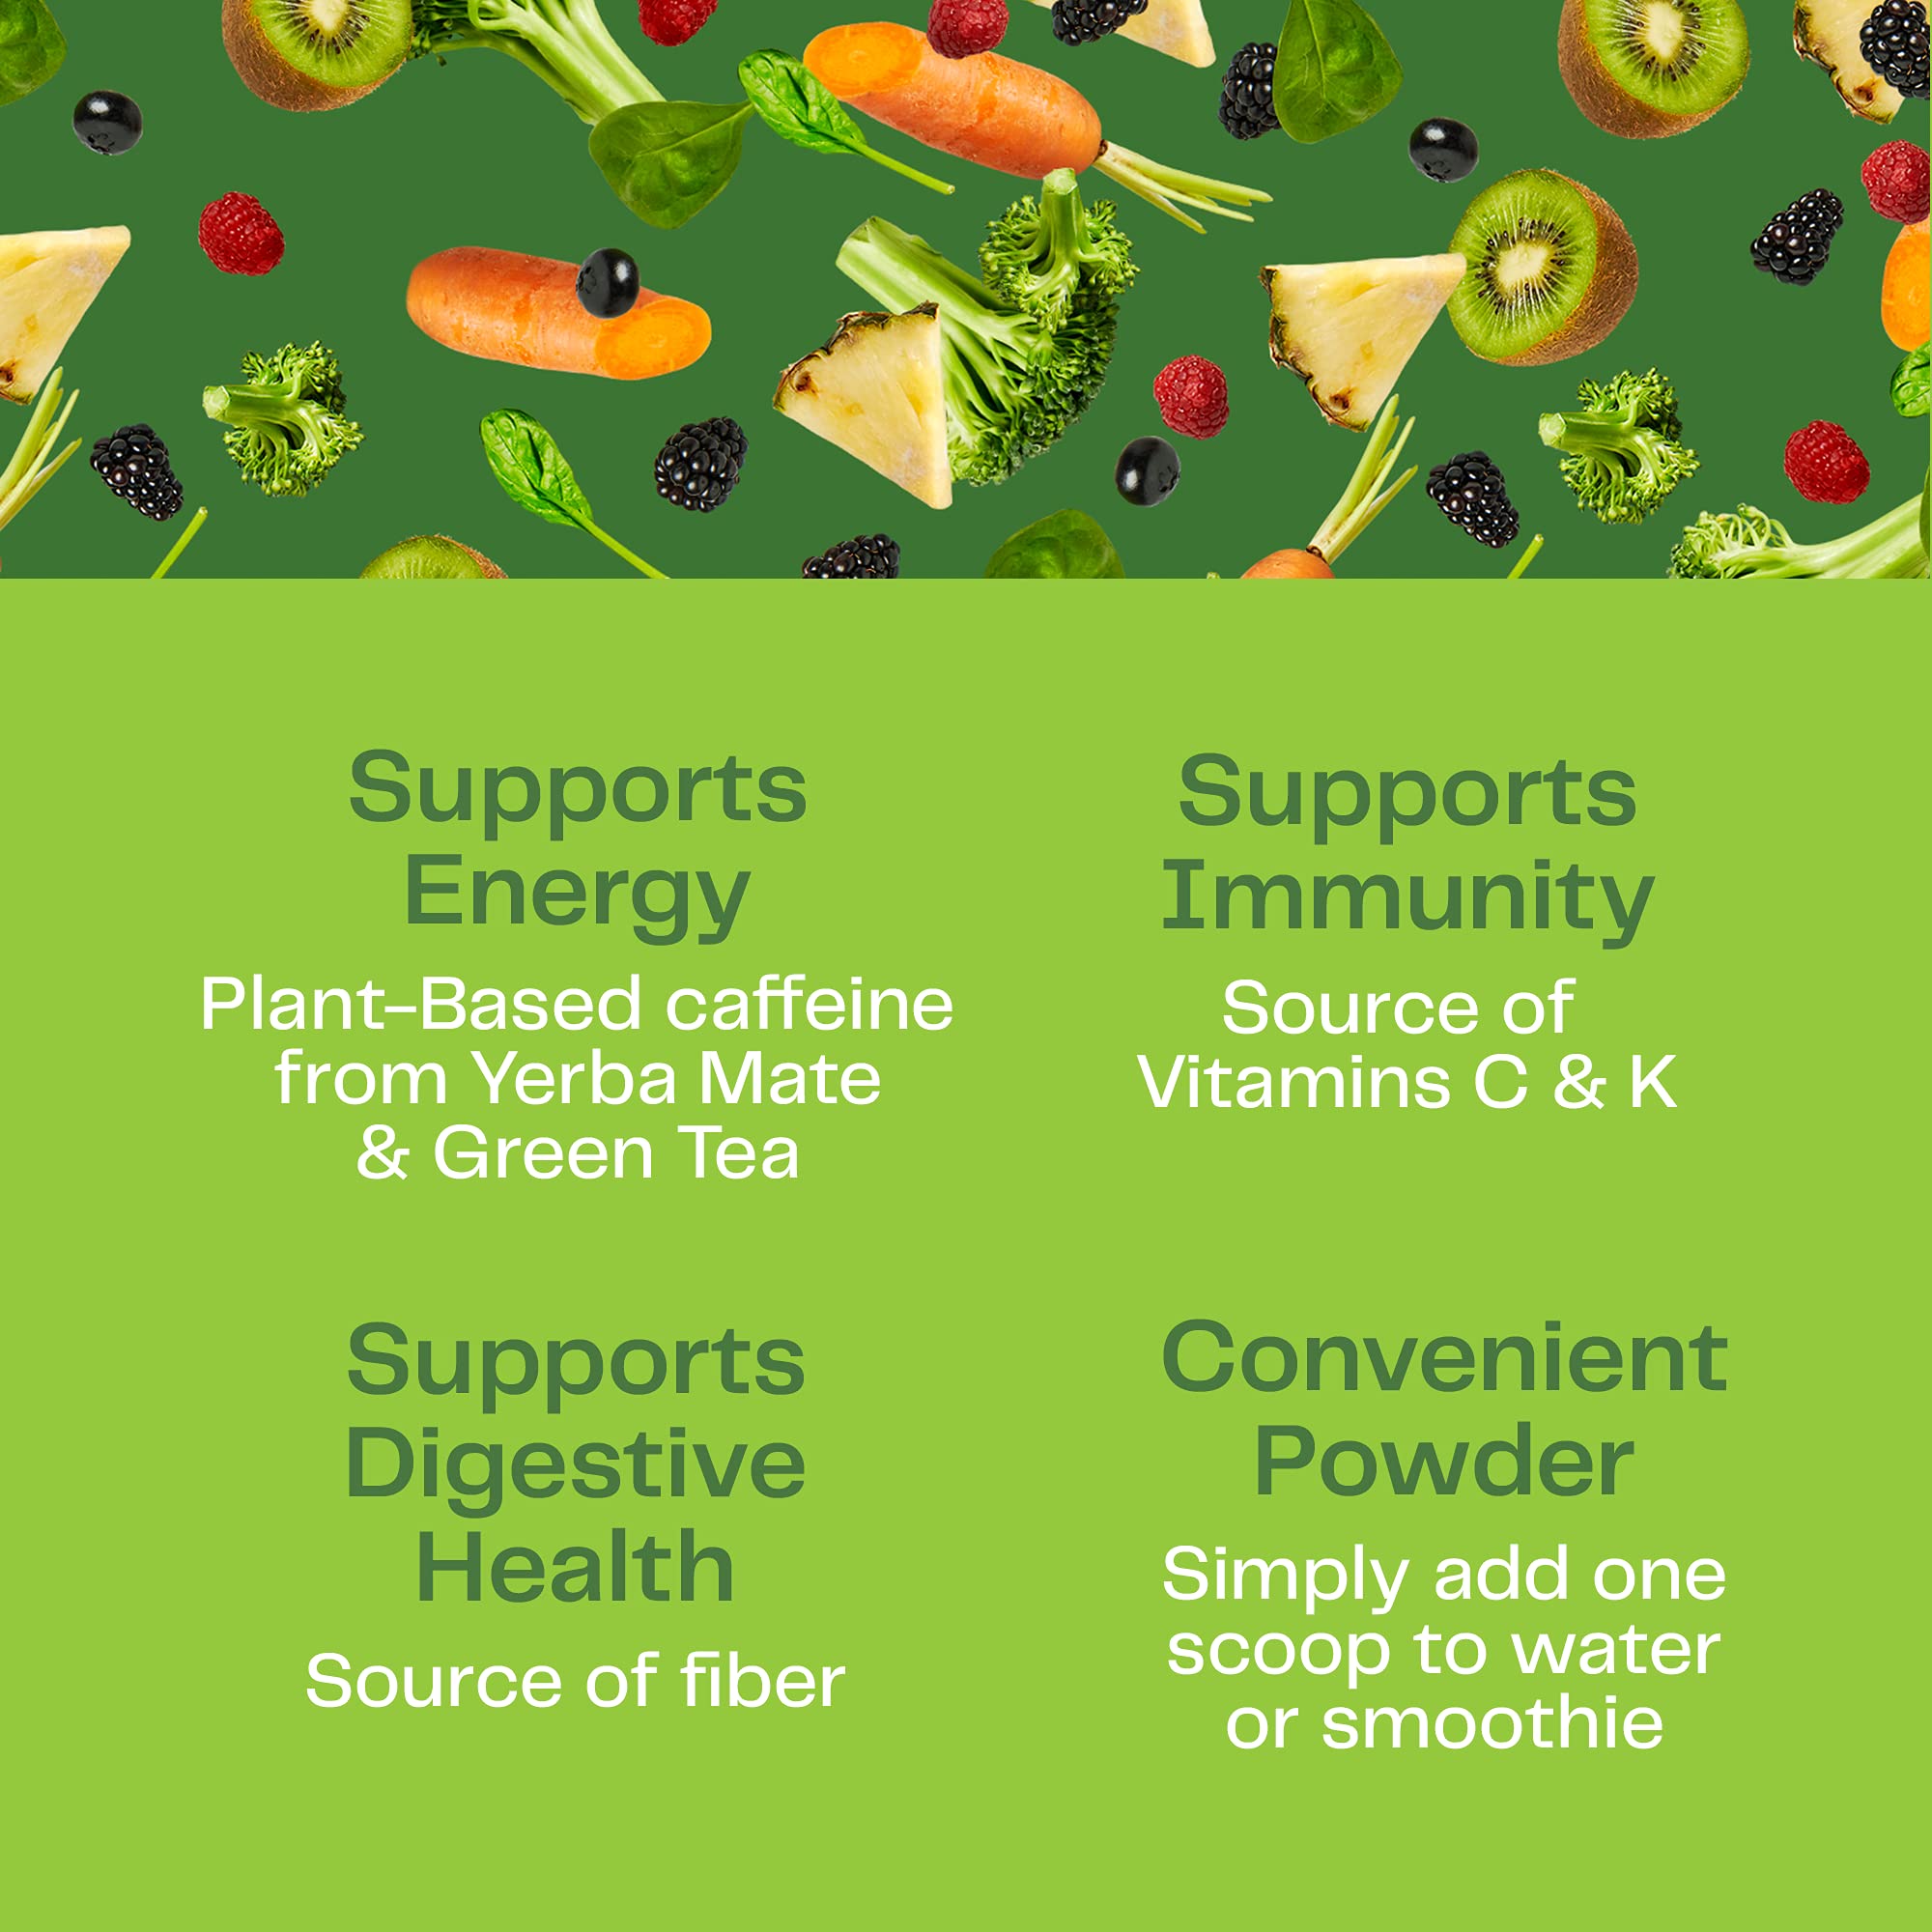 Amazing Grass Green Superfood Energy: Smoothie Mix, Super Greens Powder & Plant Based Caffeine with Green Tea and Flax Seed, Nootropics Support, Lemon Lime, 100 Servings